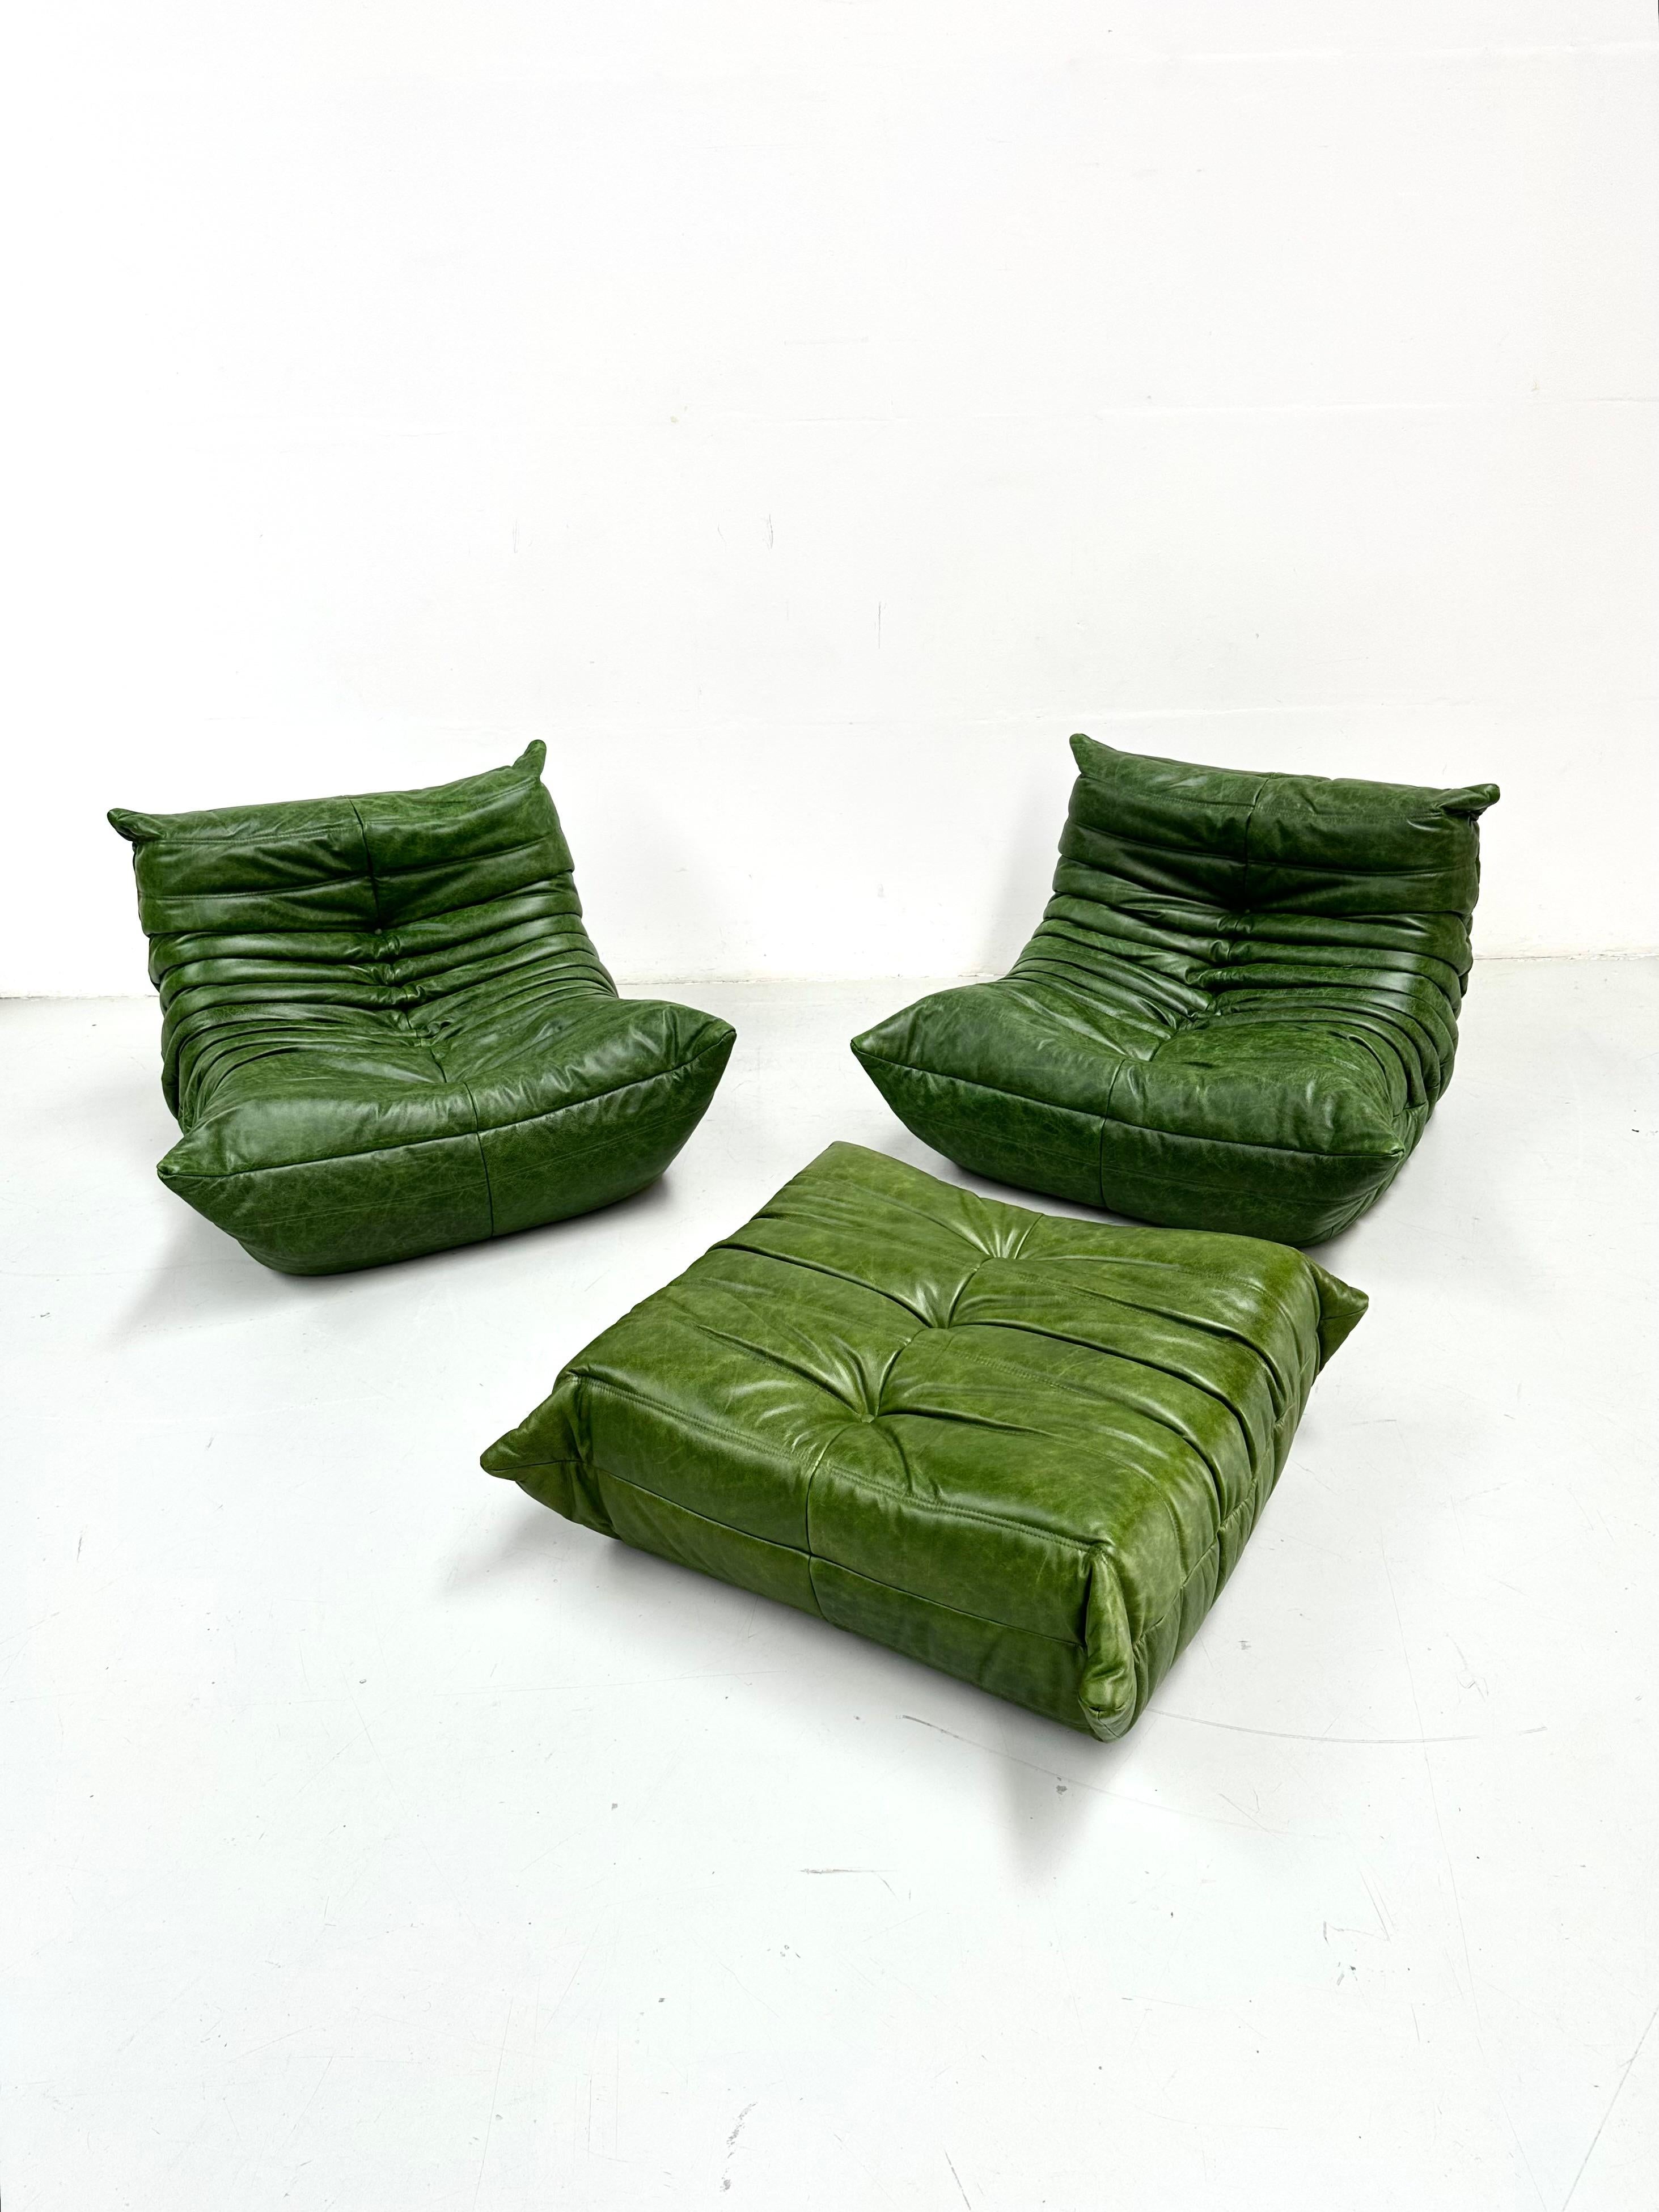 Mid-Century Modern Set of 2 Togo Chairs and Ottoman in Green Leather by M. Ducaroy for Ligne Roset.